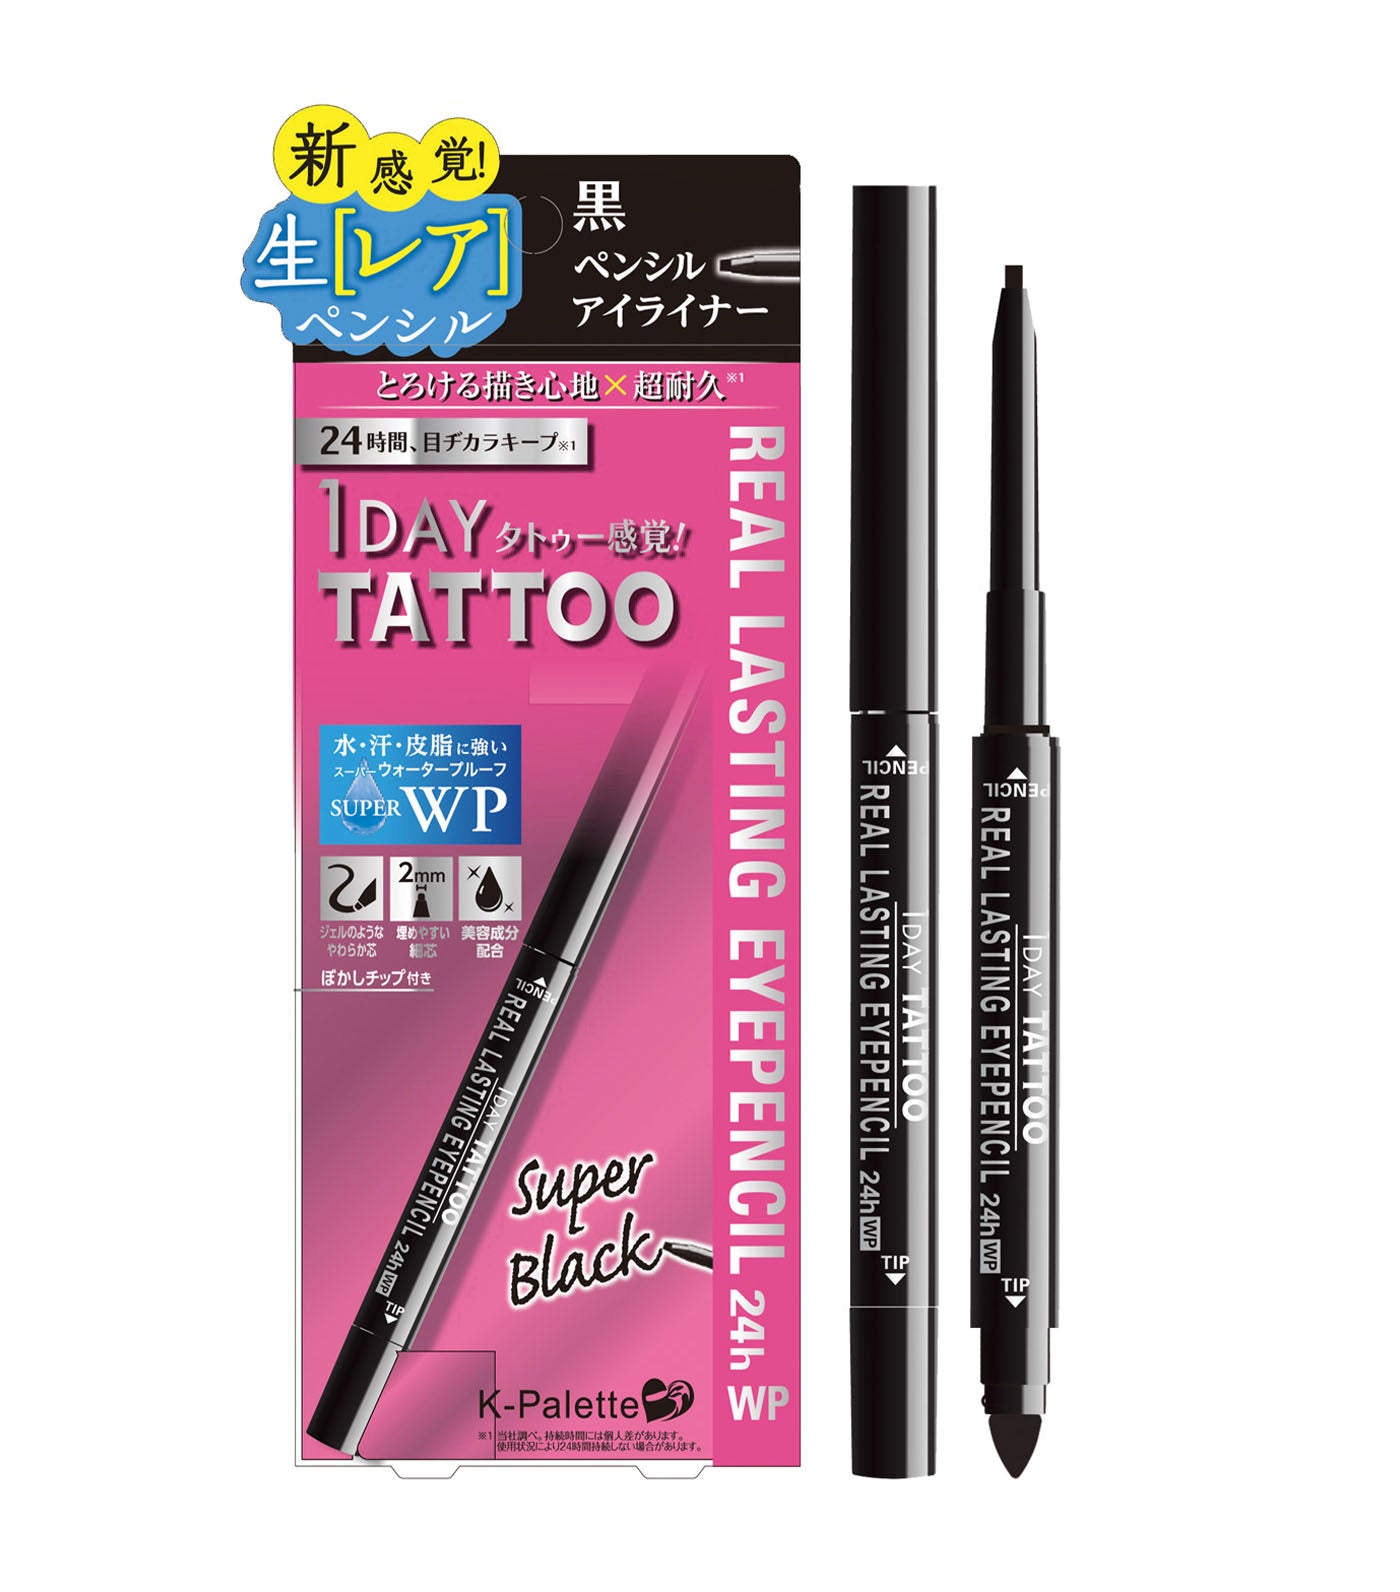 k-palette super black 1 day tattoo real lasting eyepencil